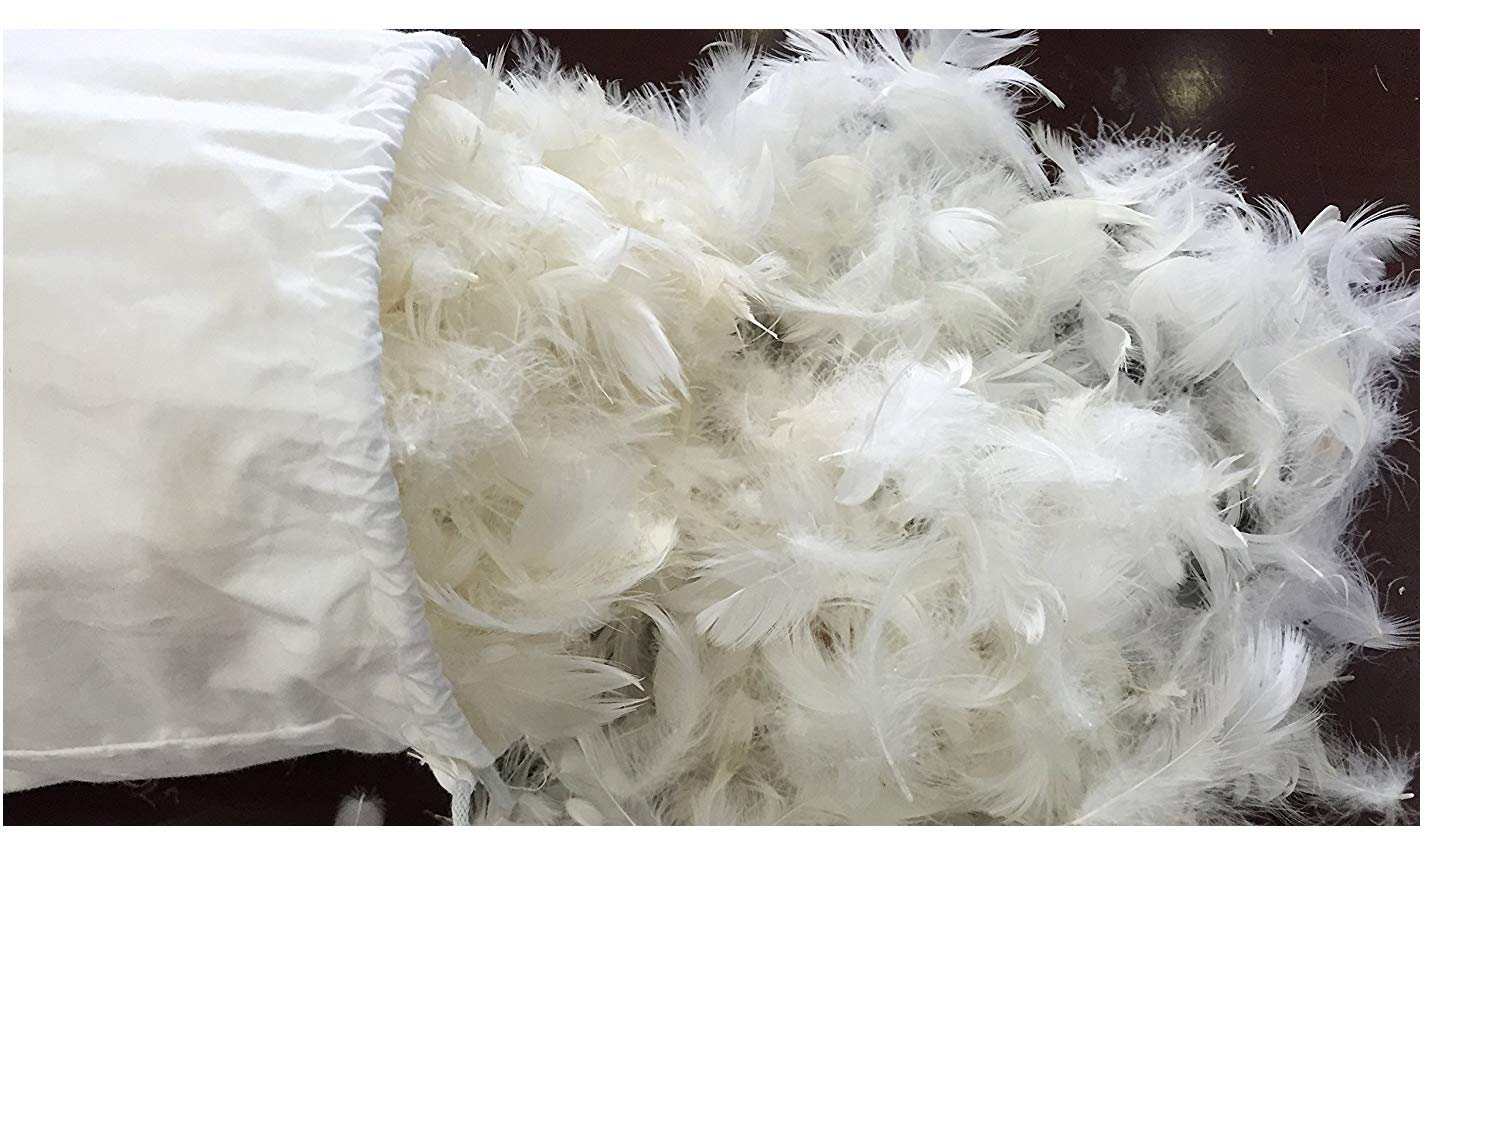 6cm White Goose Feather - Wholesale Down Feather Supplier